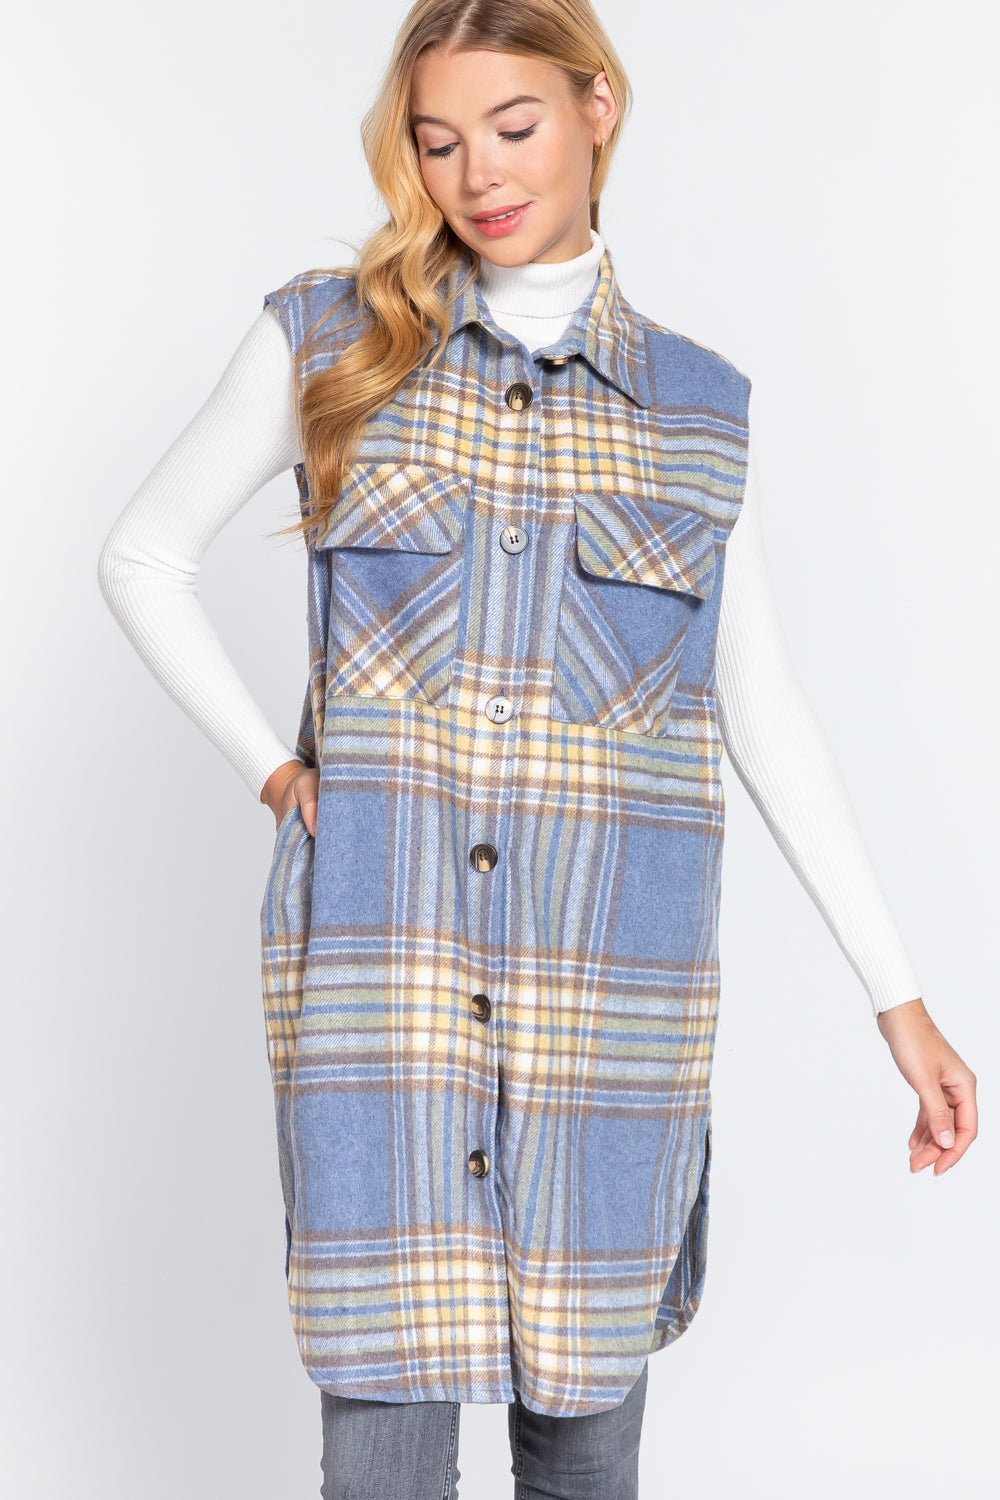 Blue Mustard - Notched Collar Brushed Plaid Vest - 2 styles - womens vest at TFC&H Co.